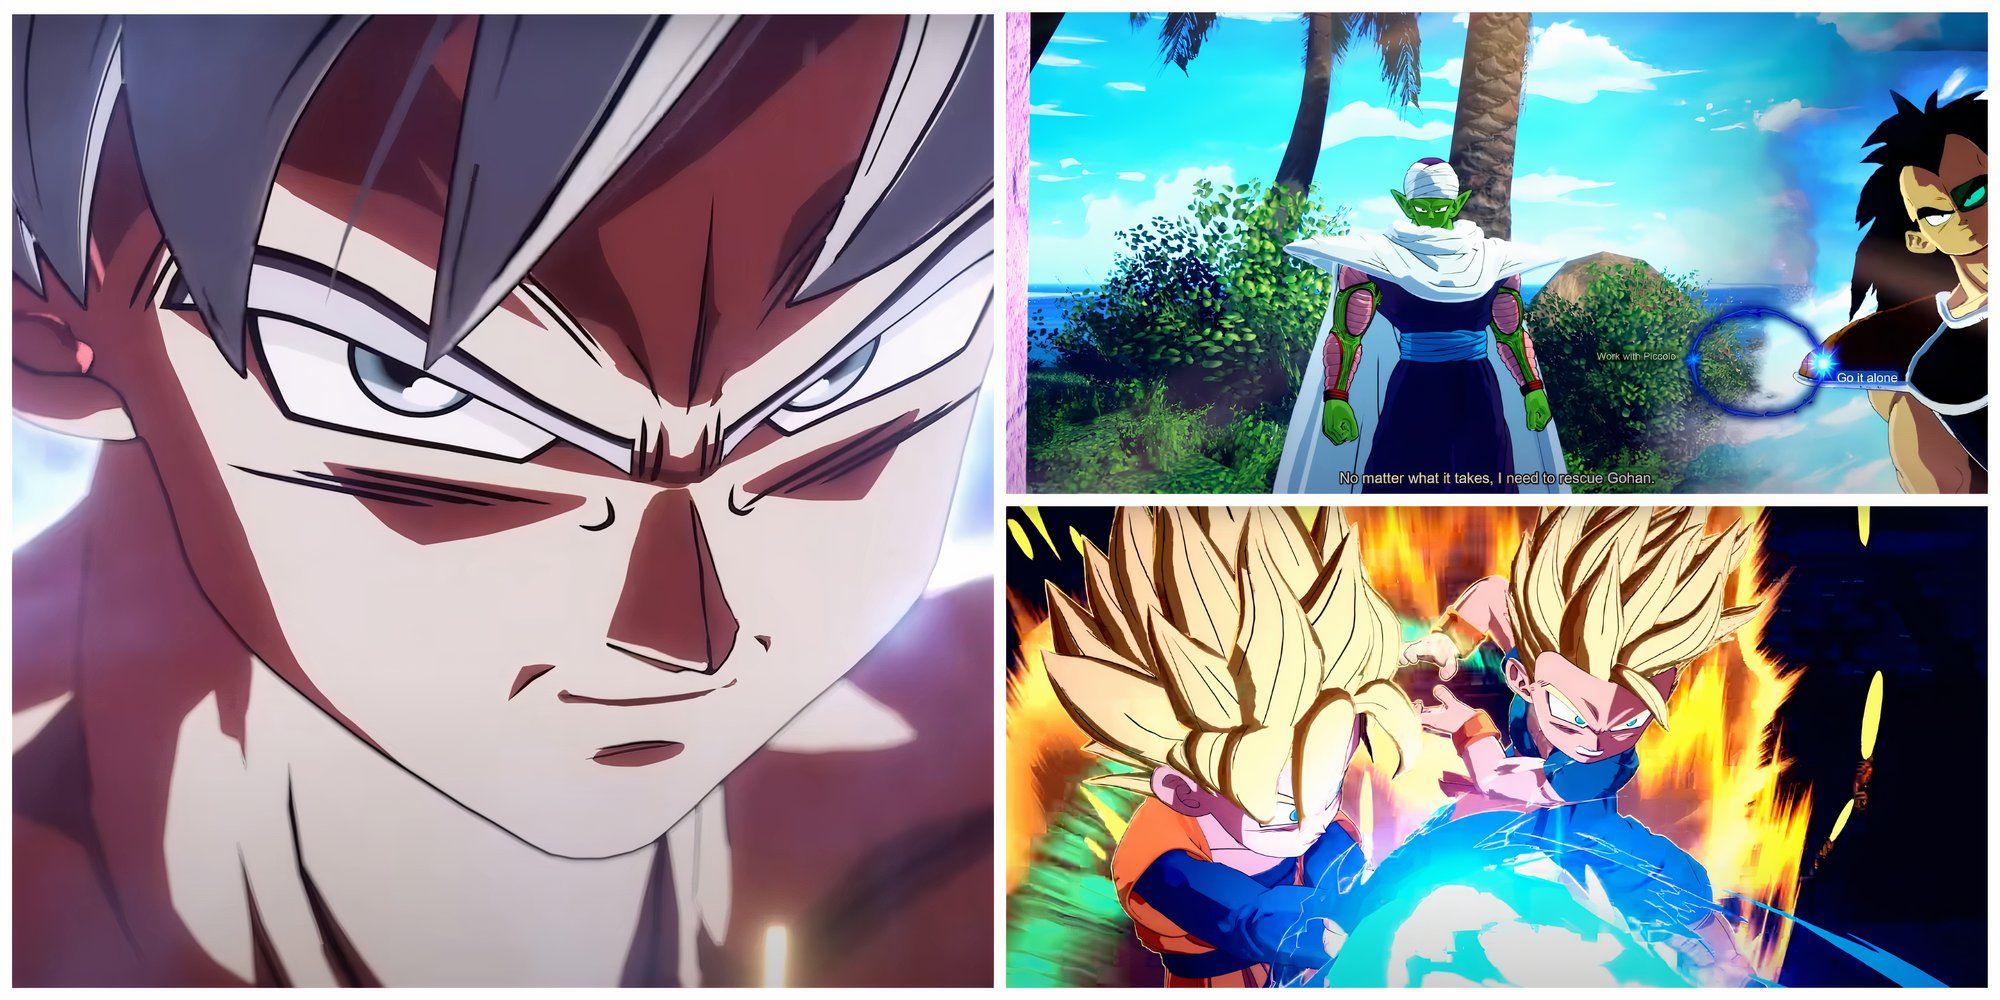 A collage image of Goku, Piccolo, Trunks, and Goten from Dragon Ball: Sparking Zero